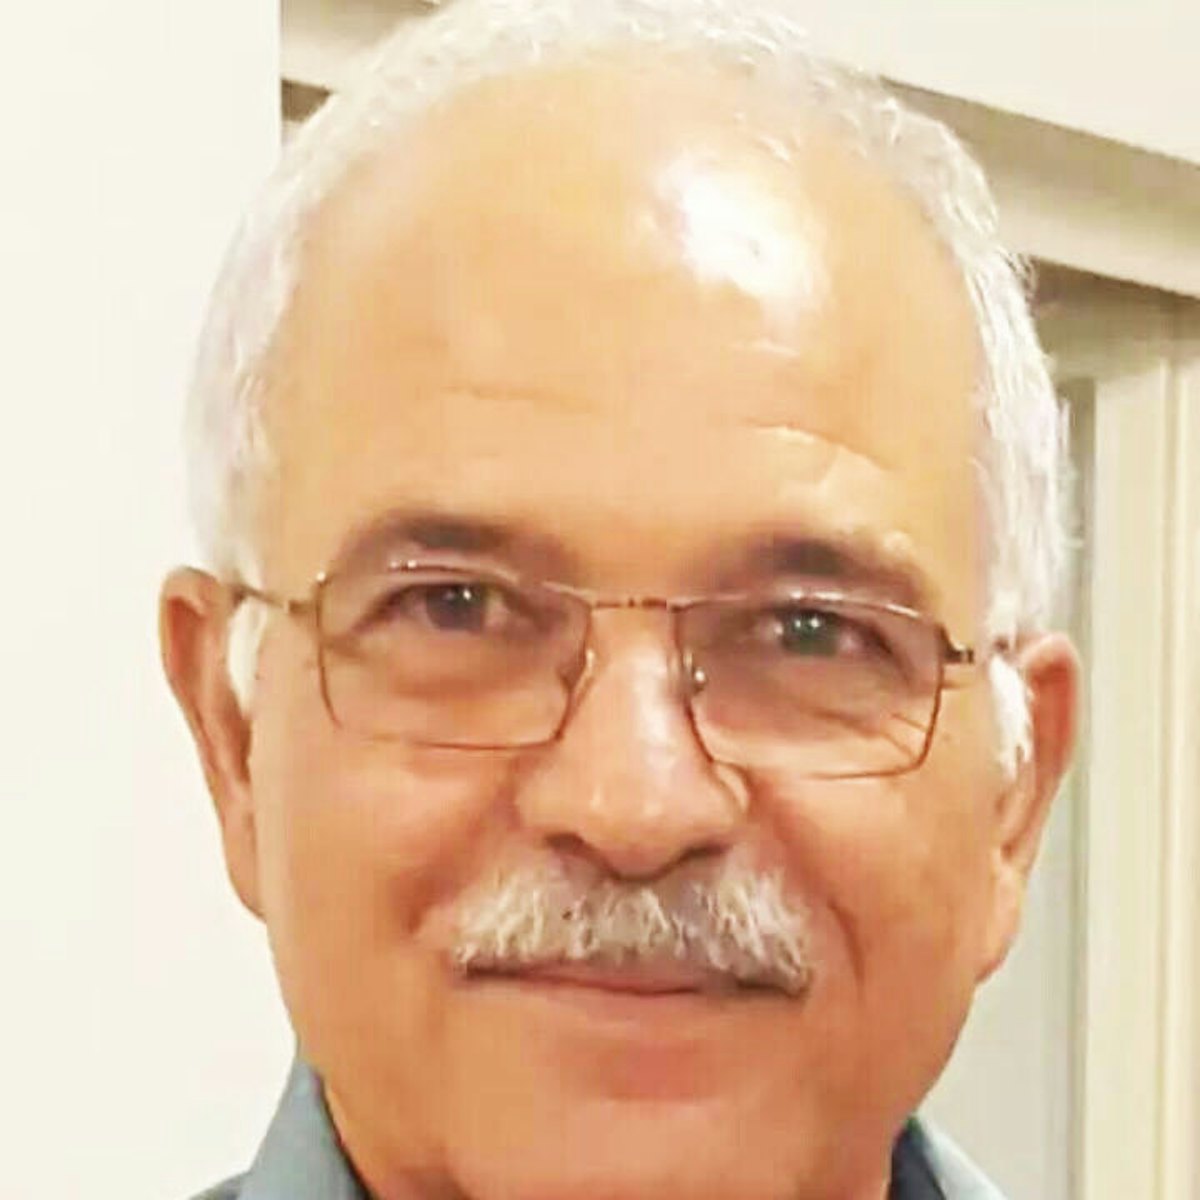 Farhang Amiri, 63, was murdered outside his home on 26 September 2016 in the city of Yazd, Iran, where he and his family have long resided. “He was known among his neighbors for his kindness, gentleness, wisdom, and humility,” said Ms. Bani Dugal, Principal Representative of the Baha’i International Community to the United Nations.